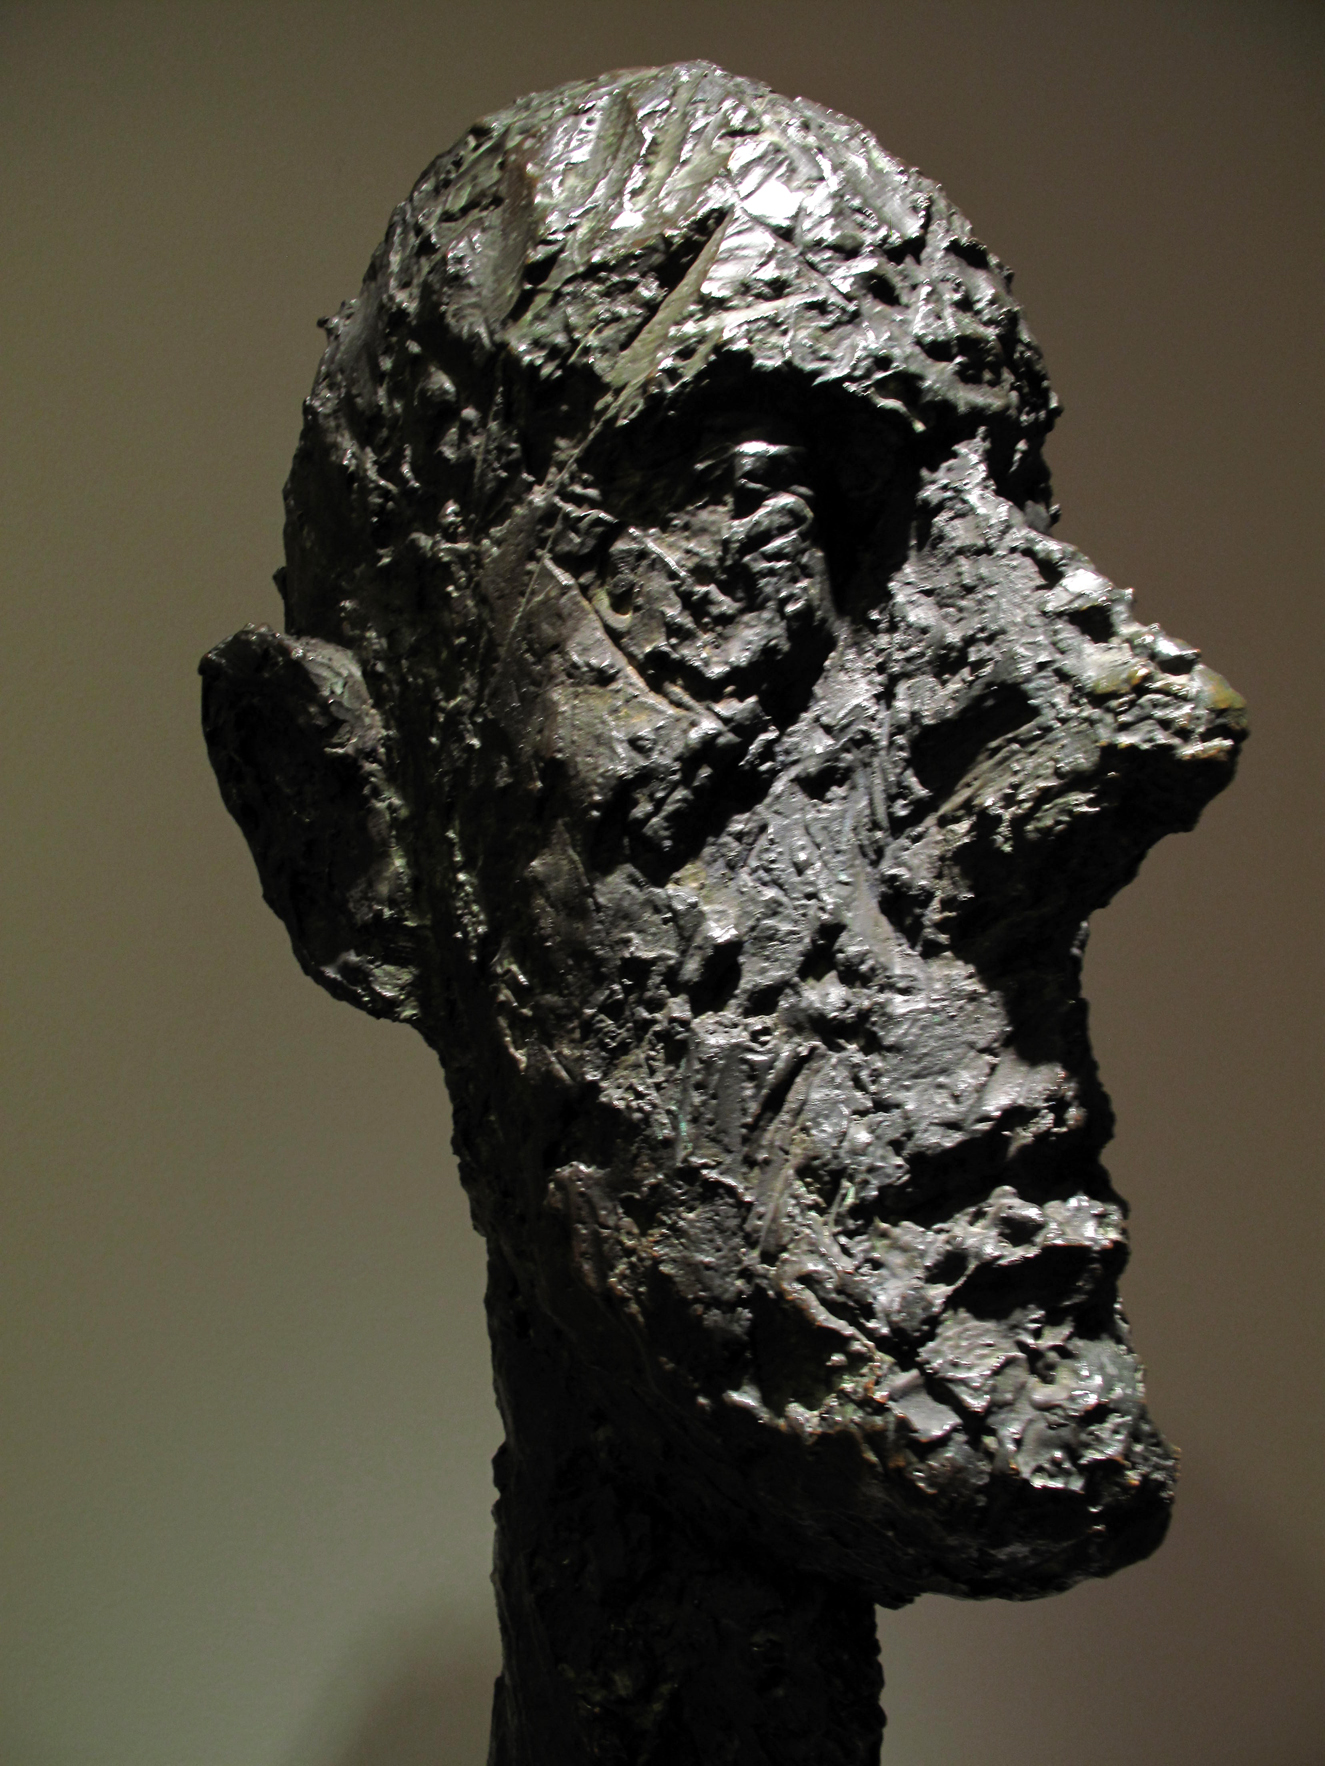 a black sculpture of a man is standing up